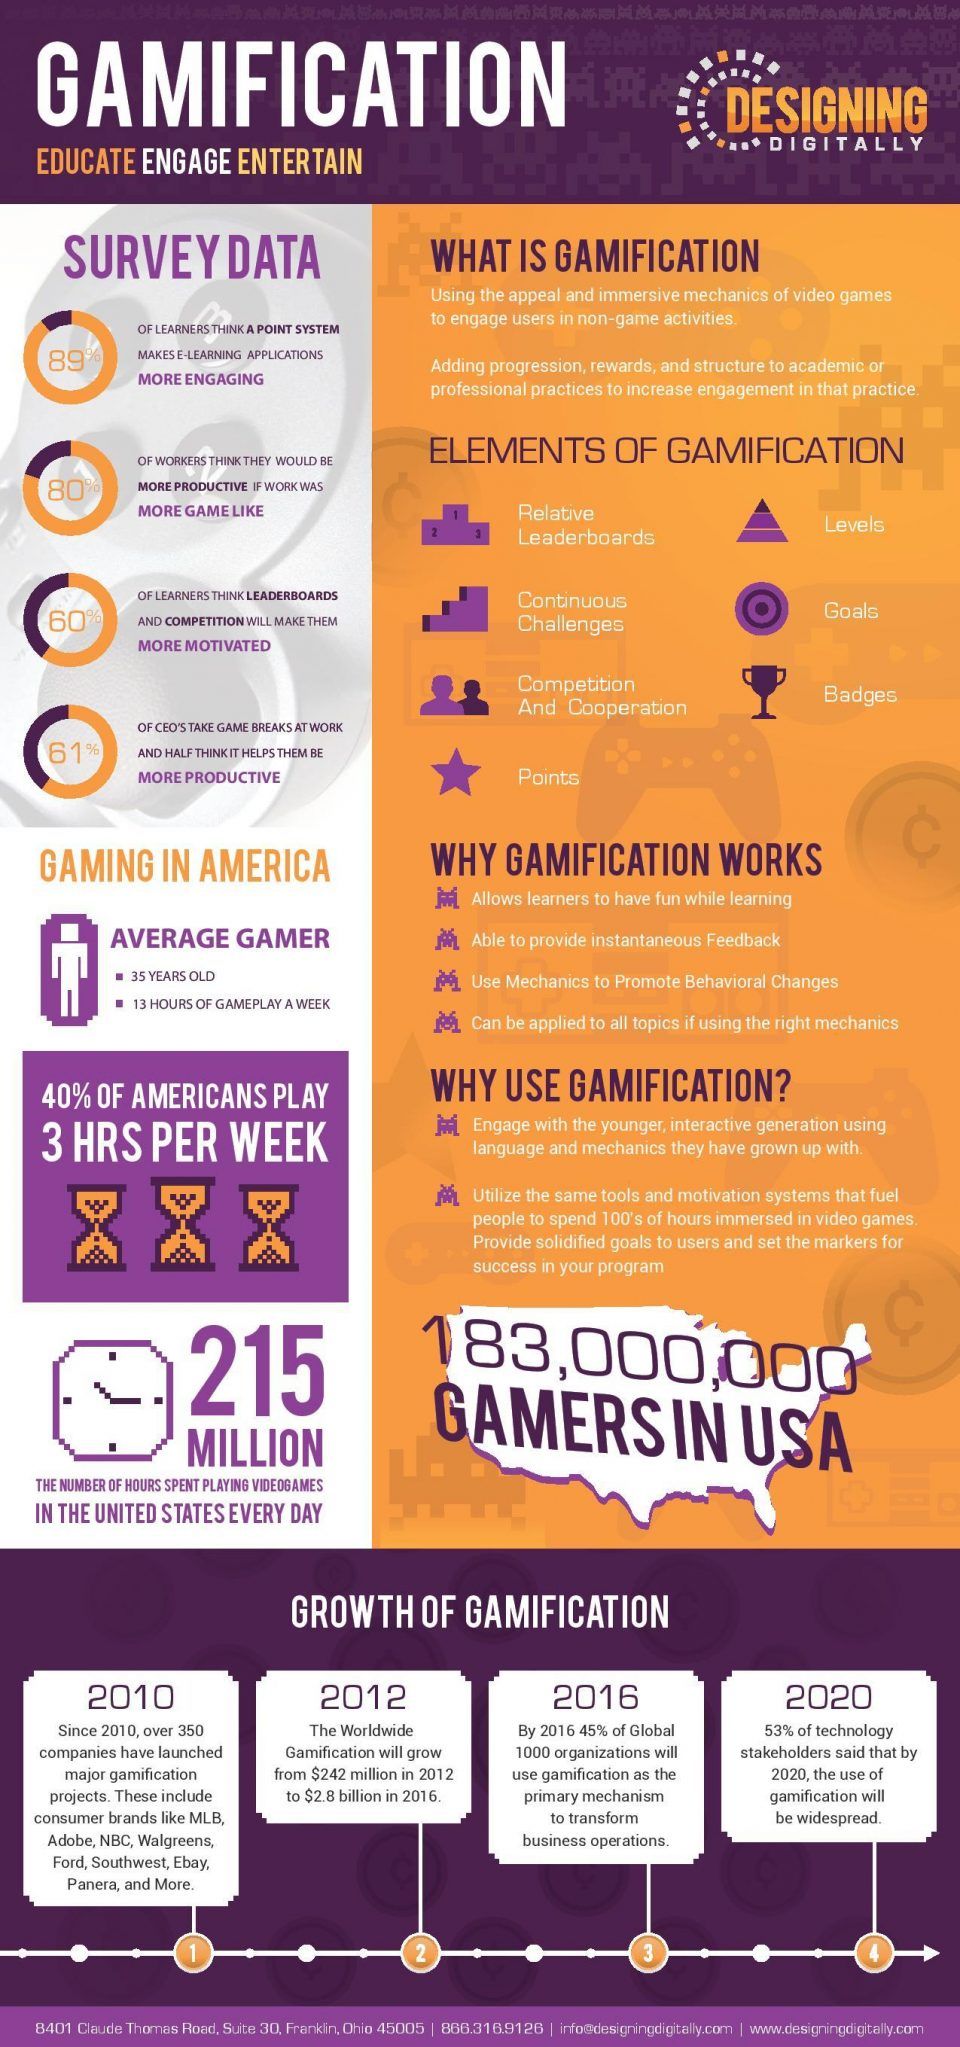 Gamification: Educate, Engage, Entertain Infographic